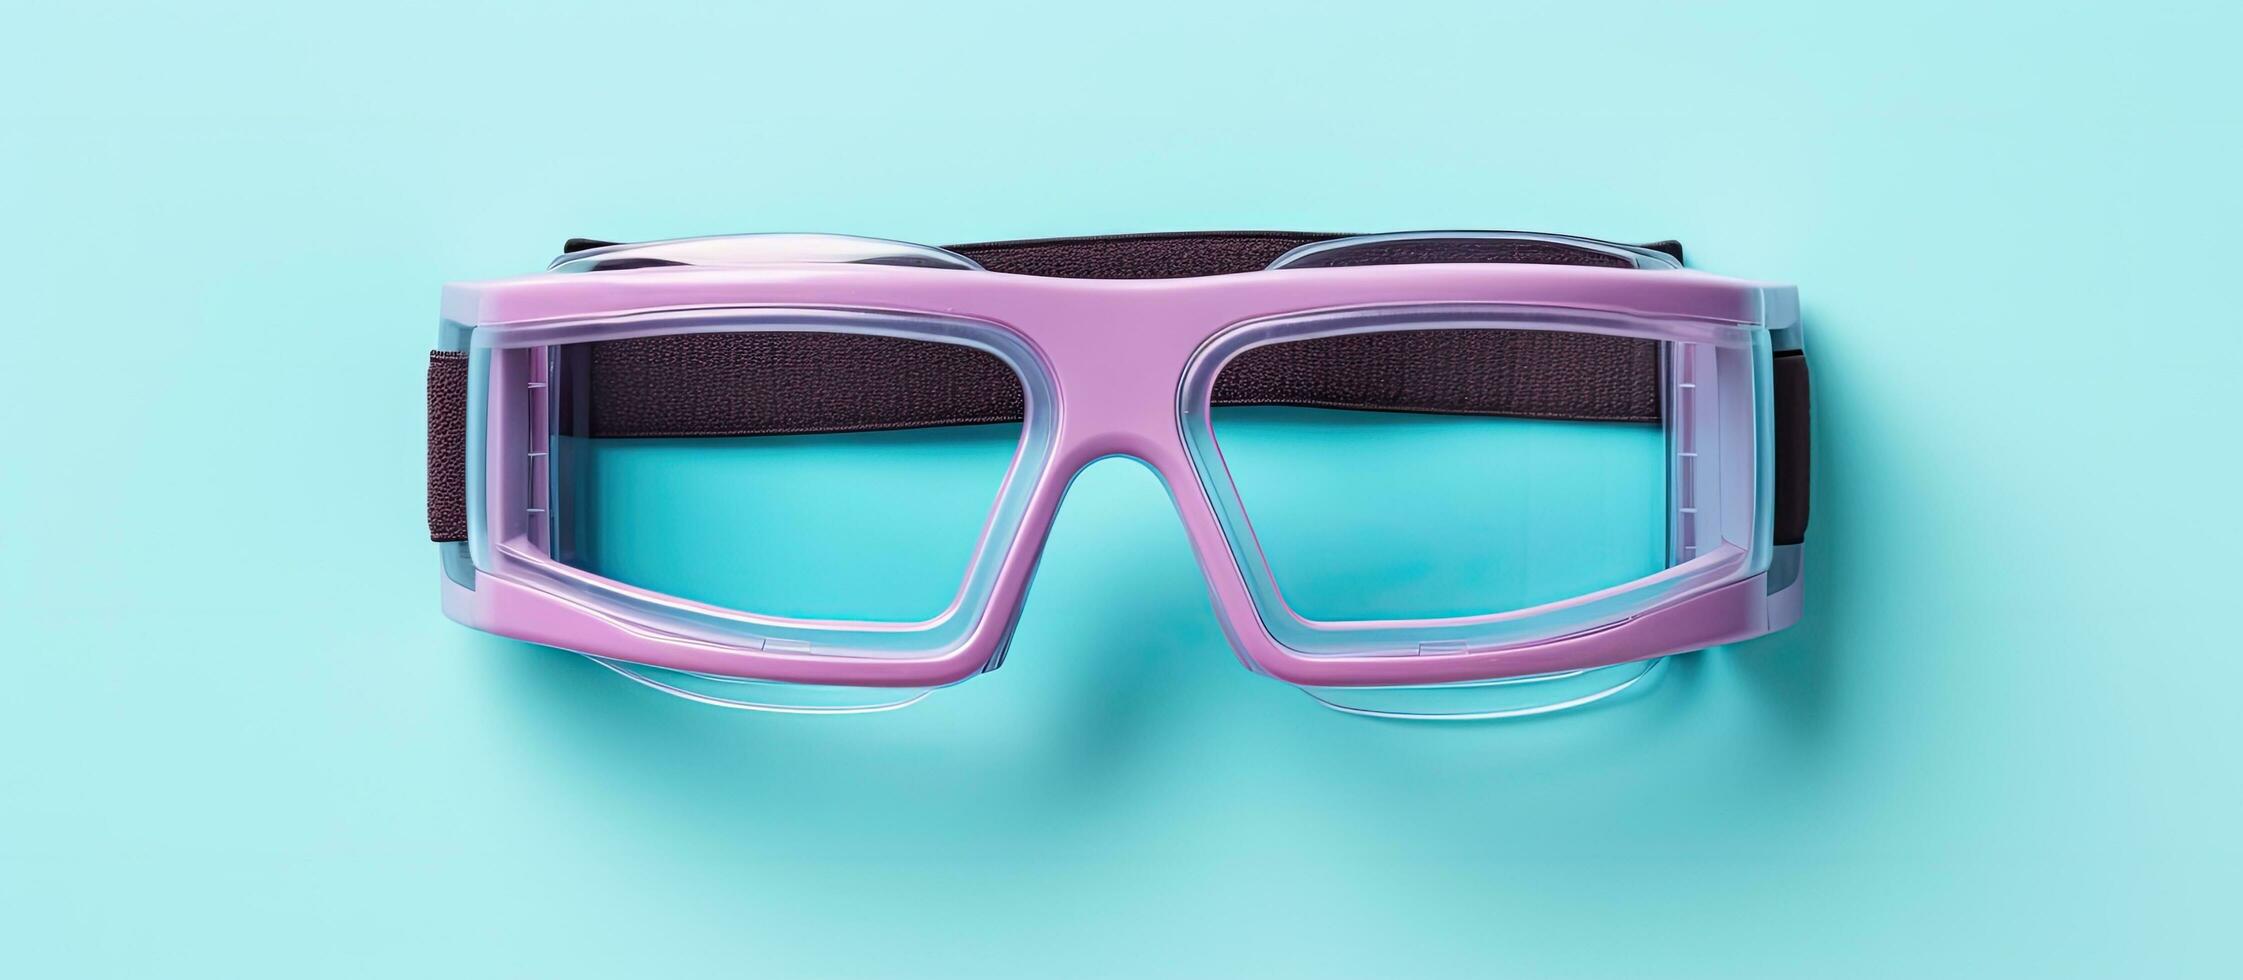 Photo of a pair of stylish pink glasses on a vibrant blue background with copy space